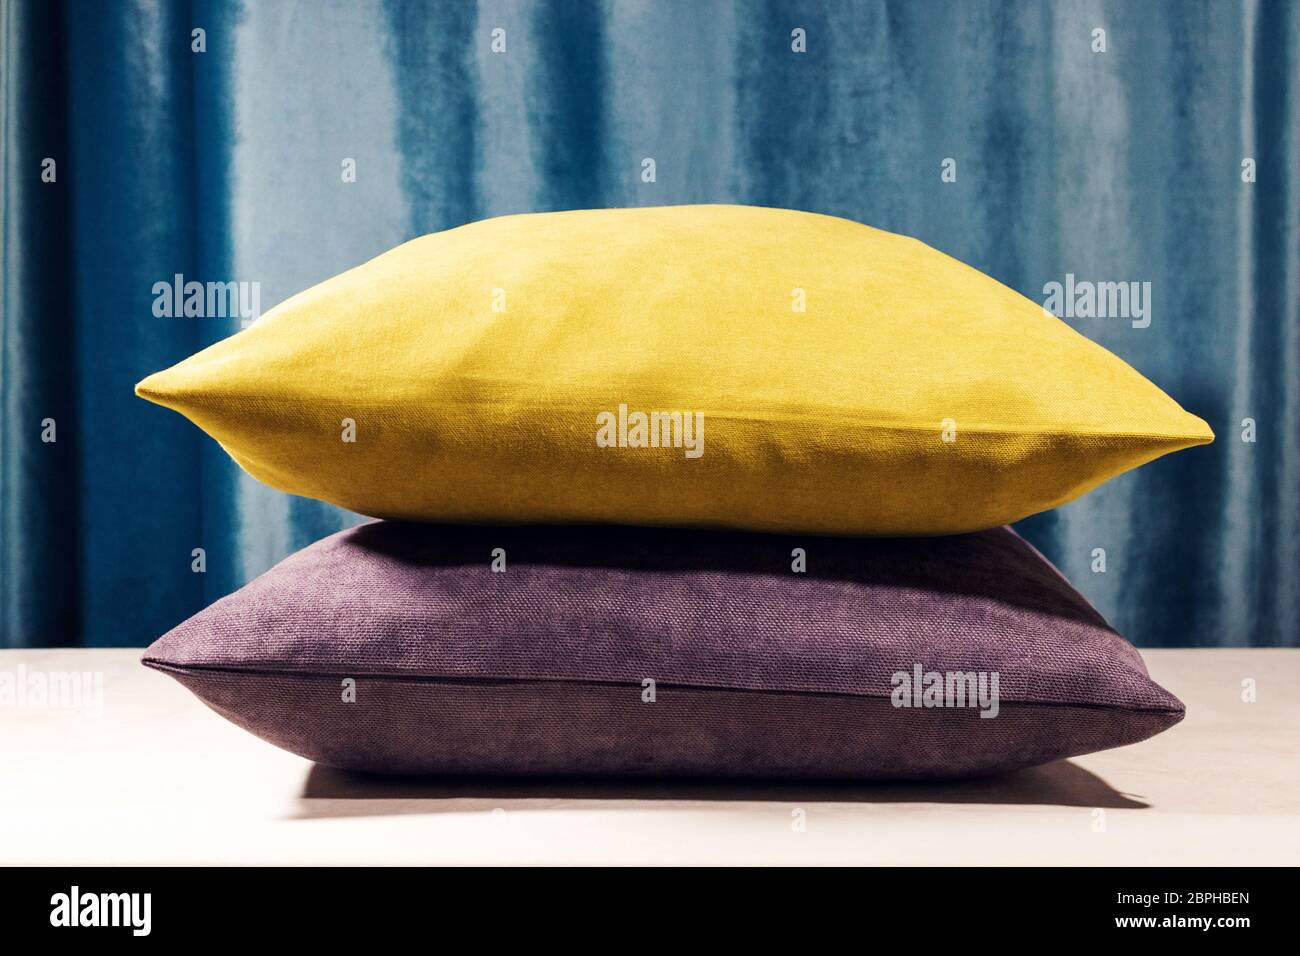 Yellow and purple pillows standing one on to another. Blue velvet background. Soft light coming from the top, Warm whitebalance Stock Photo